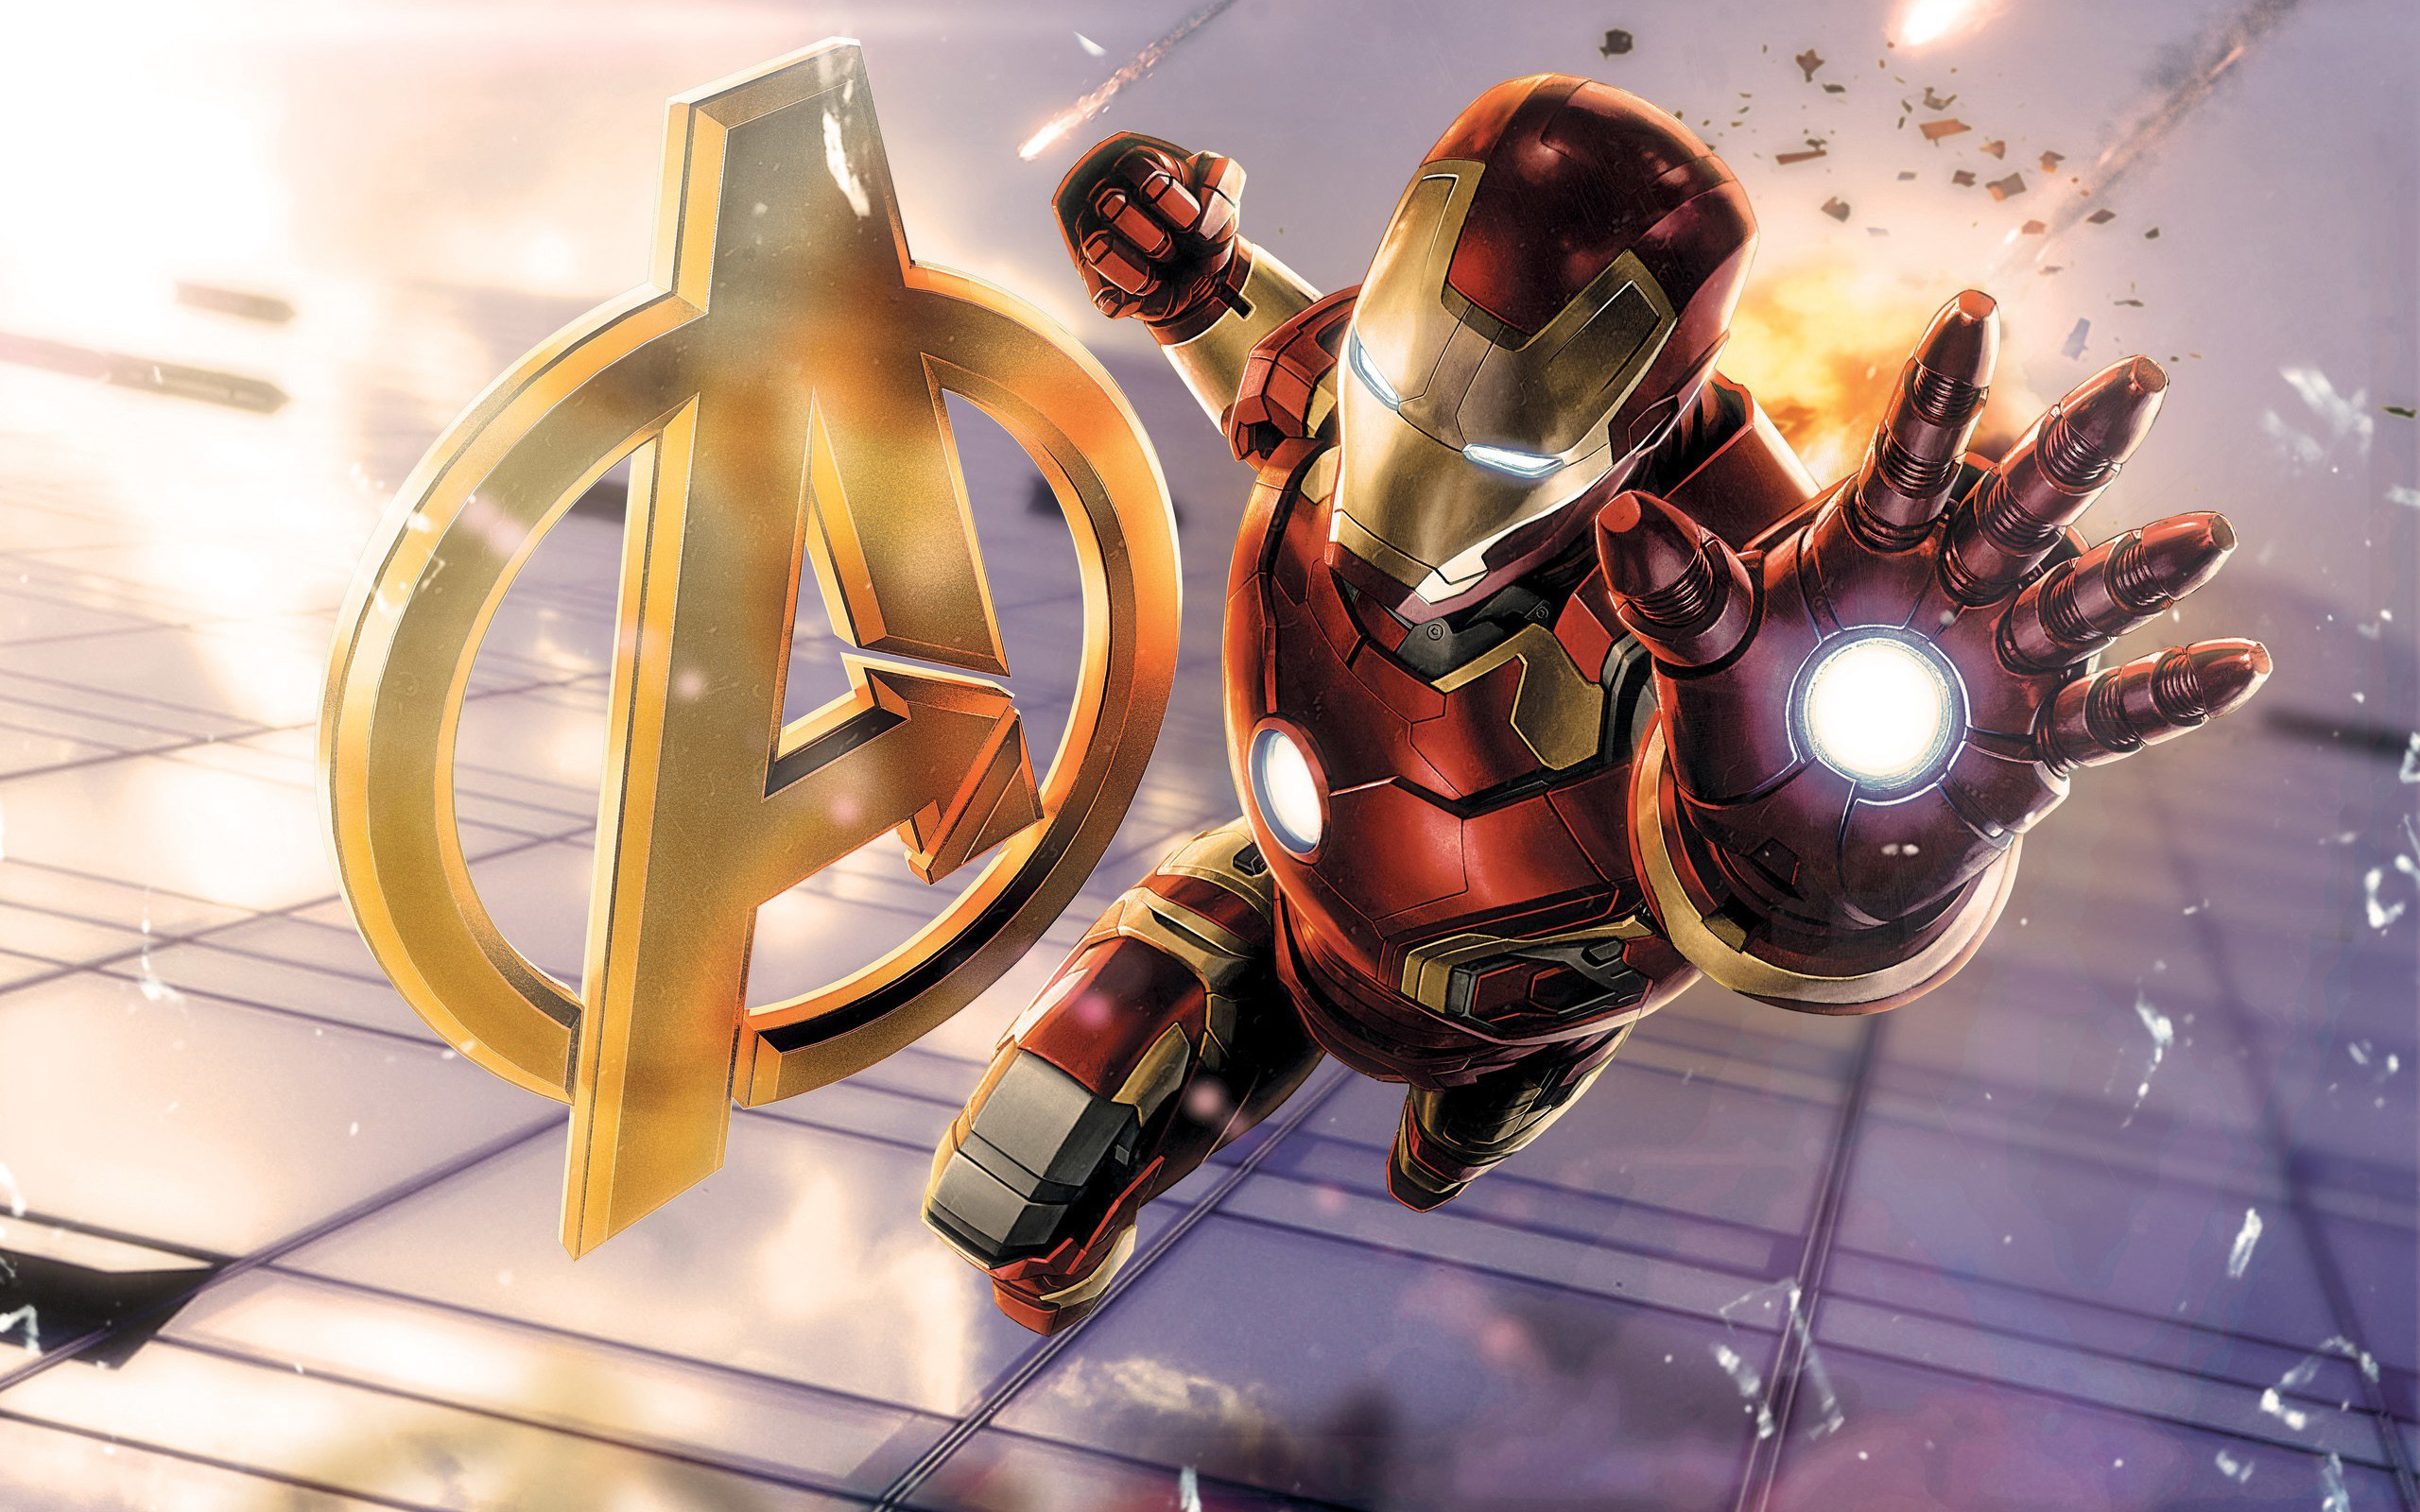 2560x1600 Search Results for “iron man avengers hd wallpaper” – Adorable Wallpapers